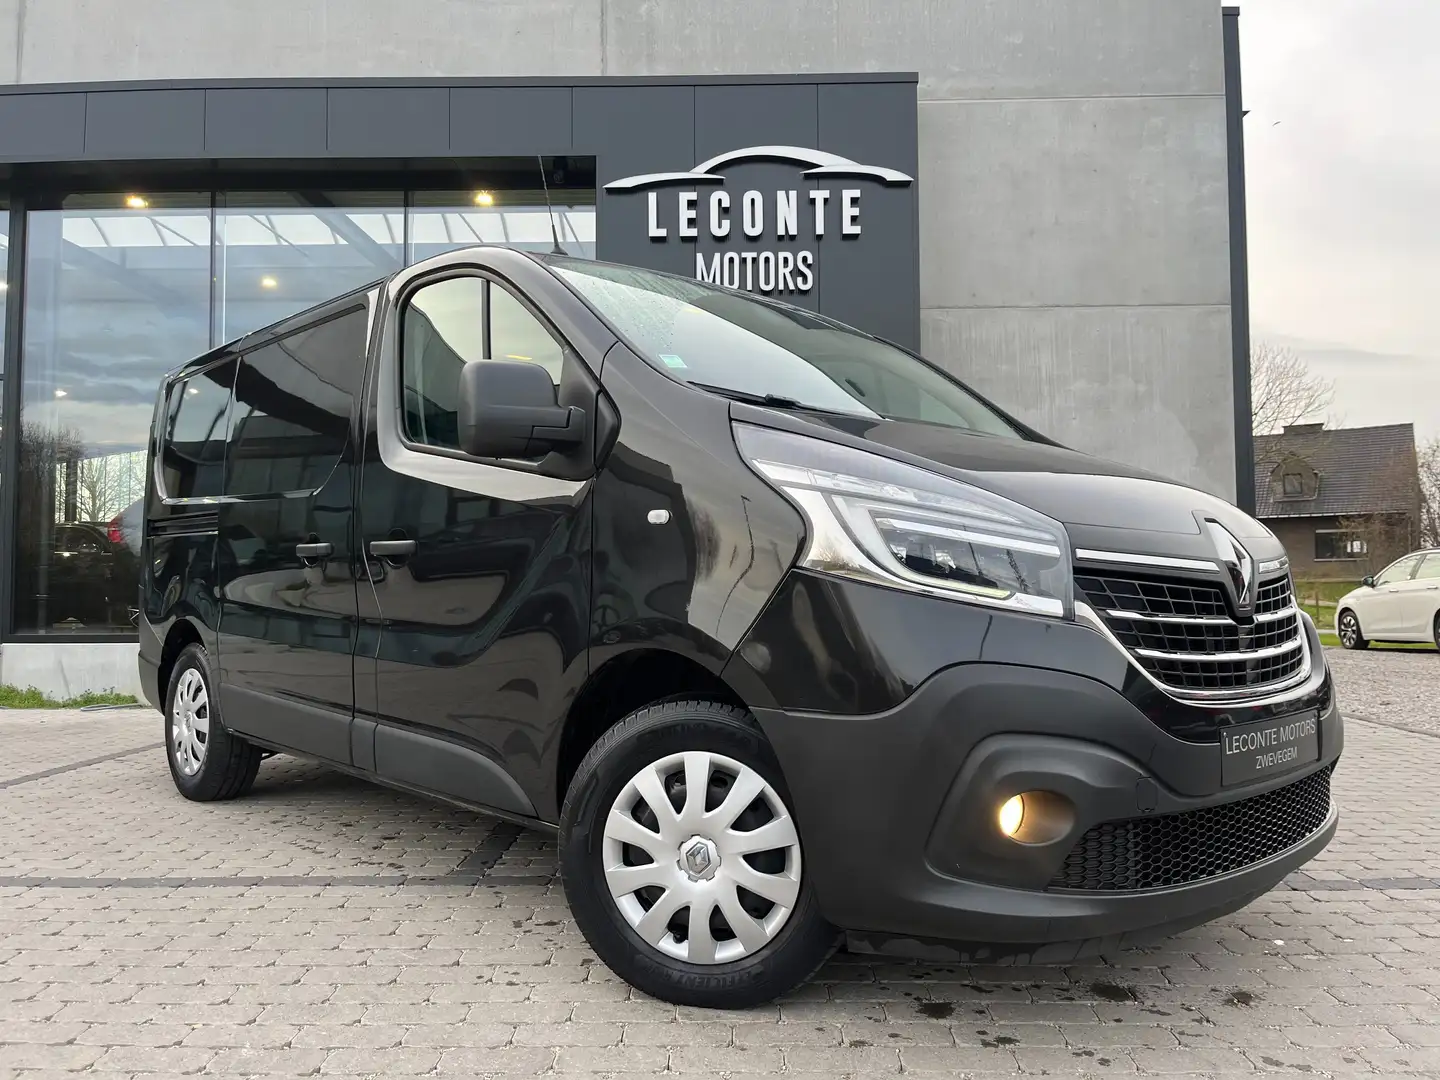 Renault Trafic 2.0DCI Lichte Vracht 3-zit/LED/Gps/Camera/PDC/BLTH Fekete - 1